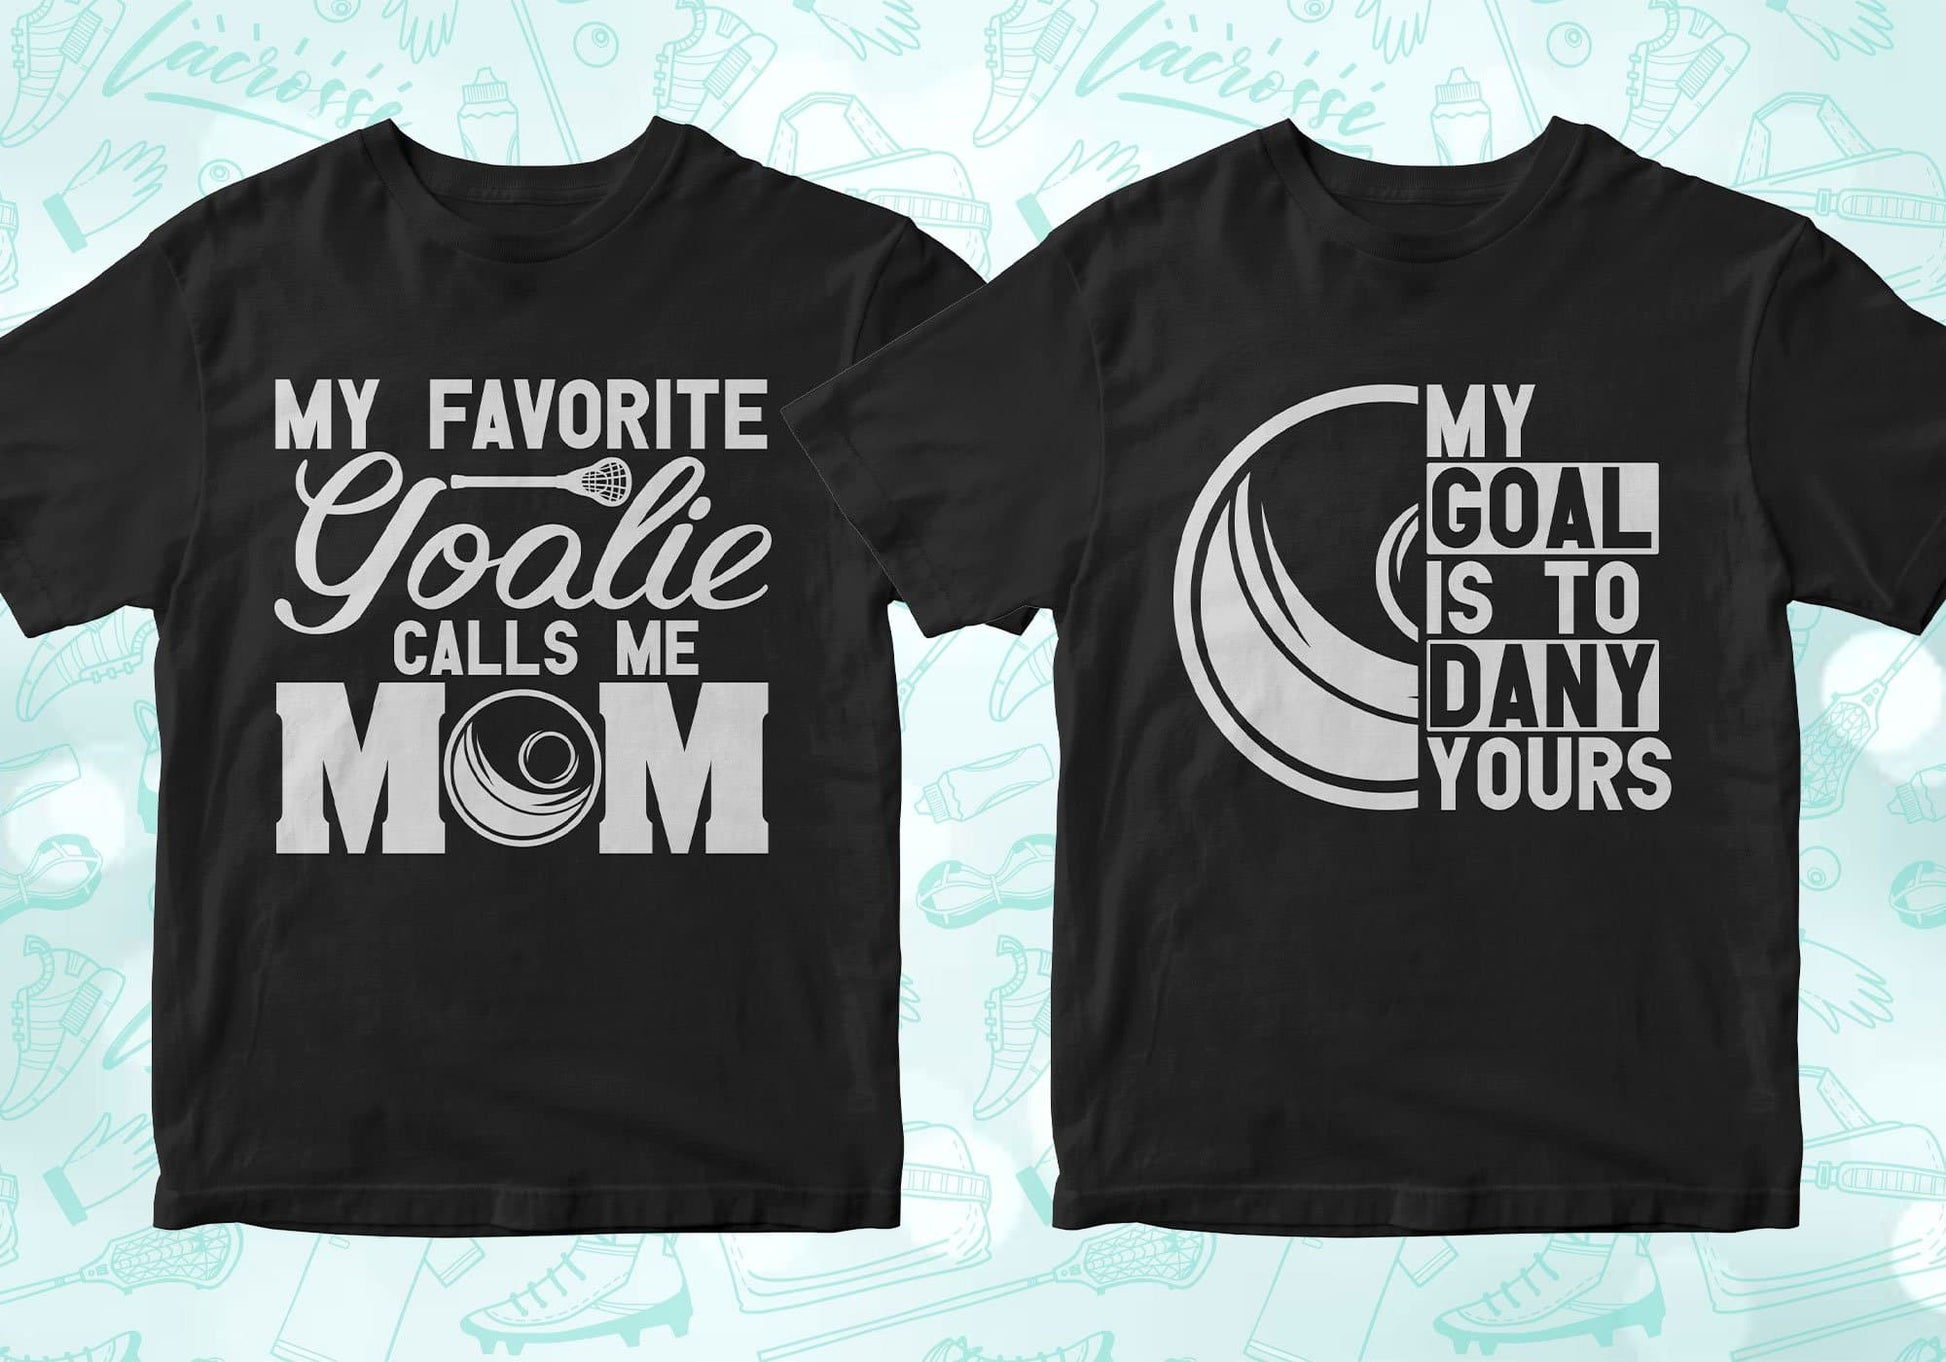 my favorite goalie calls me mom, my goal is to deny yours, lacrosse shirts lacrosse tshirt lacrosse t shirts lacrosse shirt designs lacrosse graphic